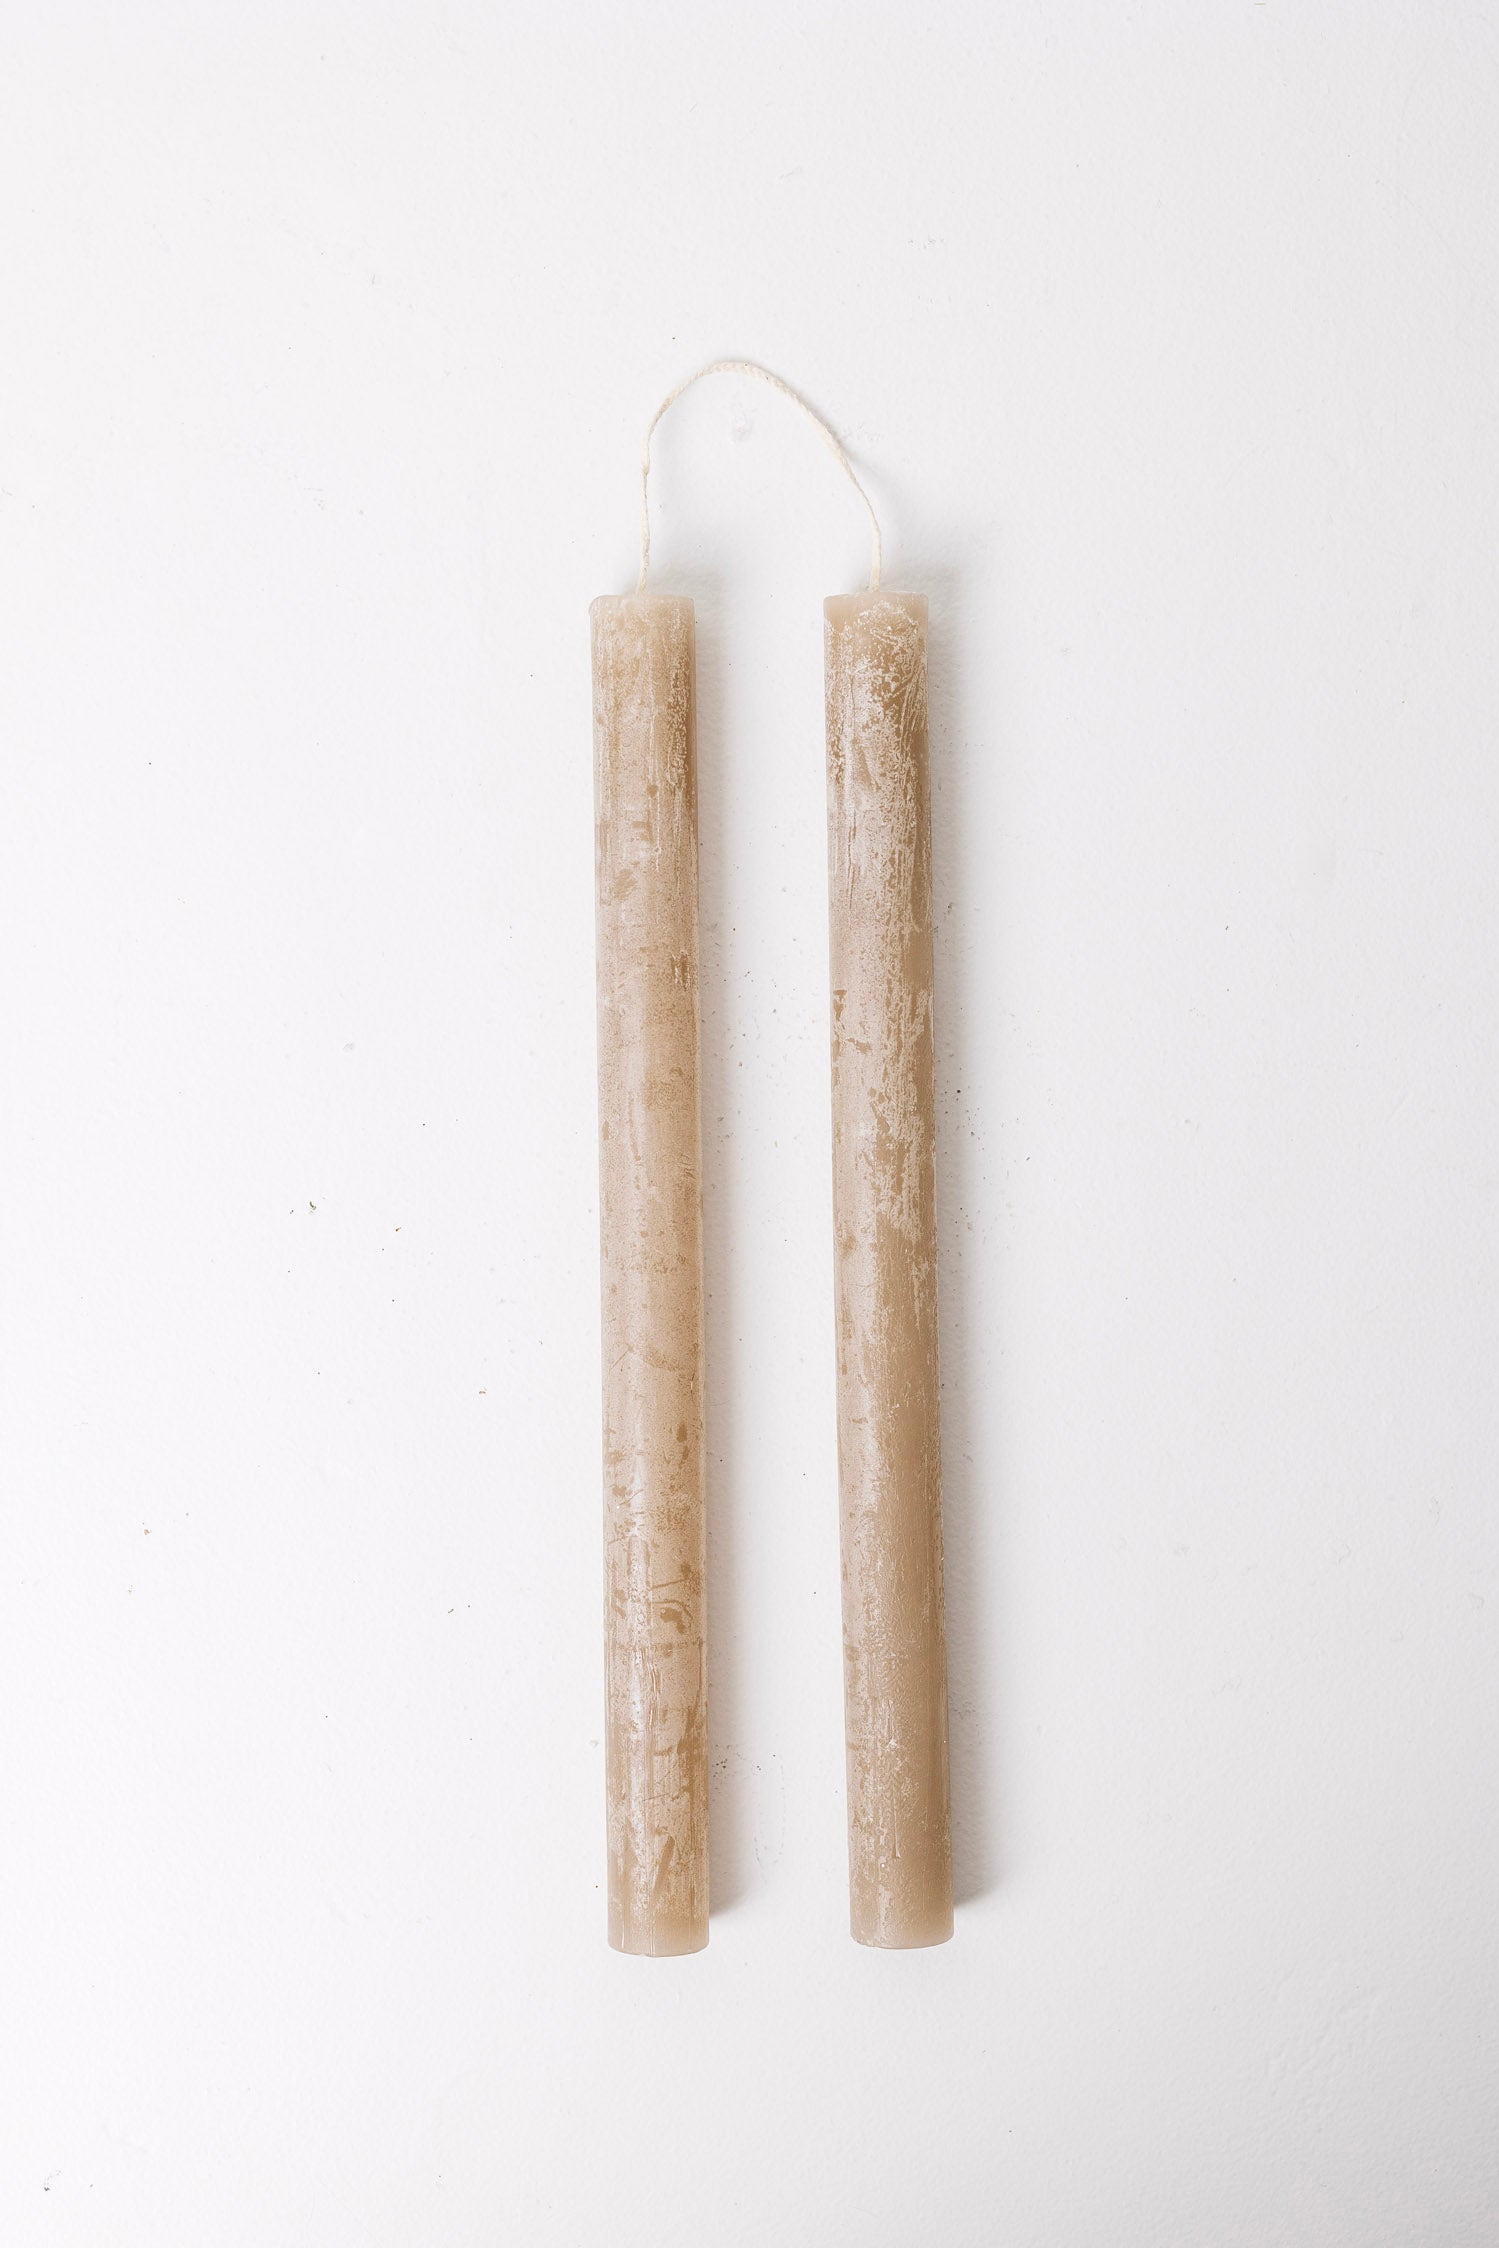 Raelyn Taper Candles - Set of 2